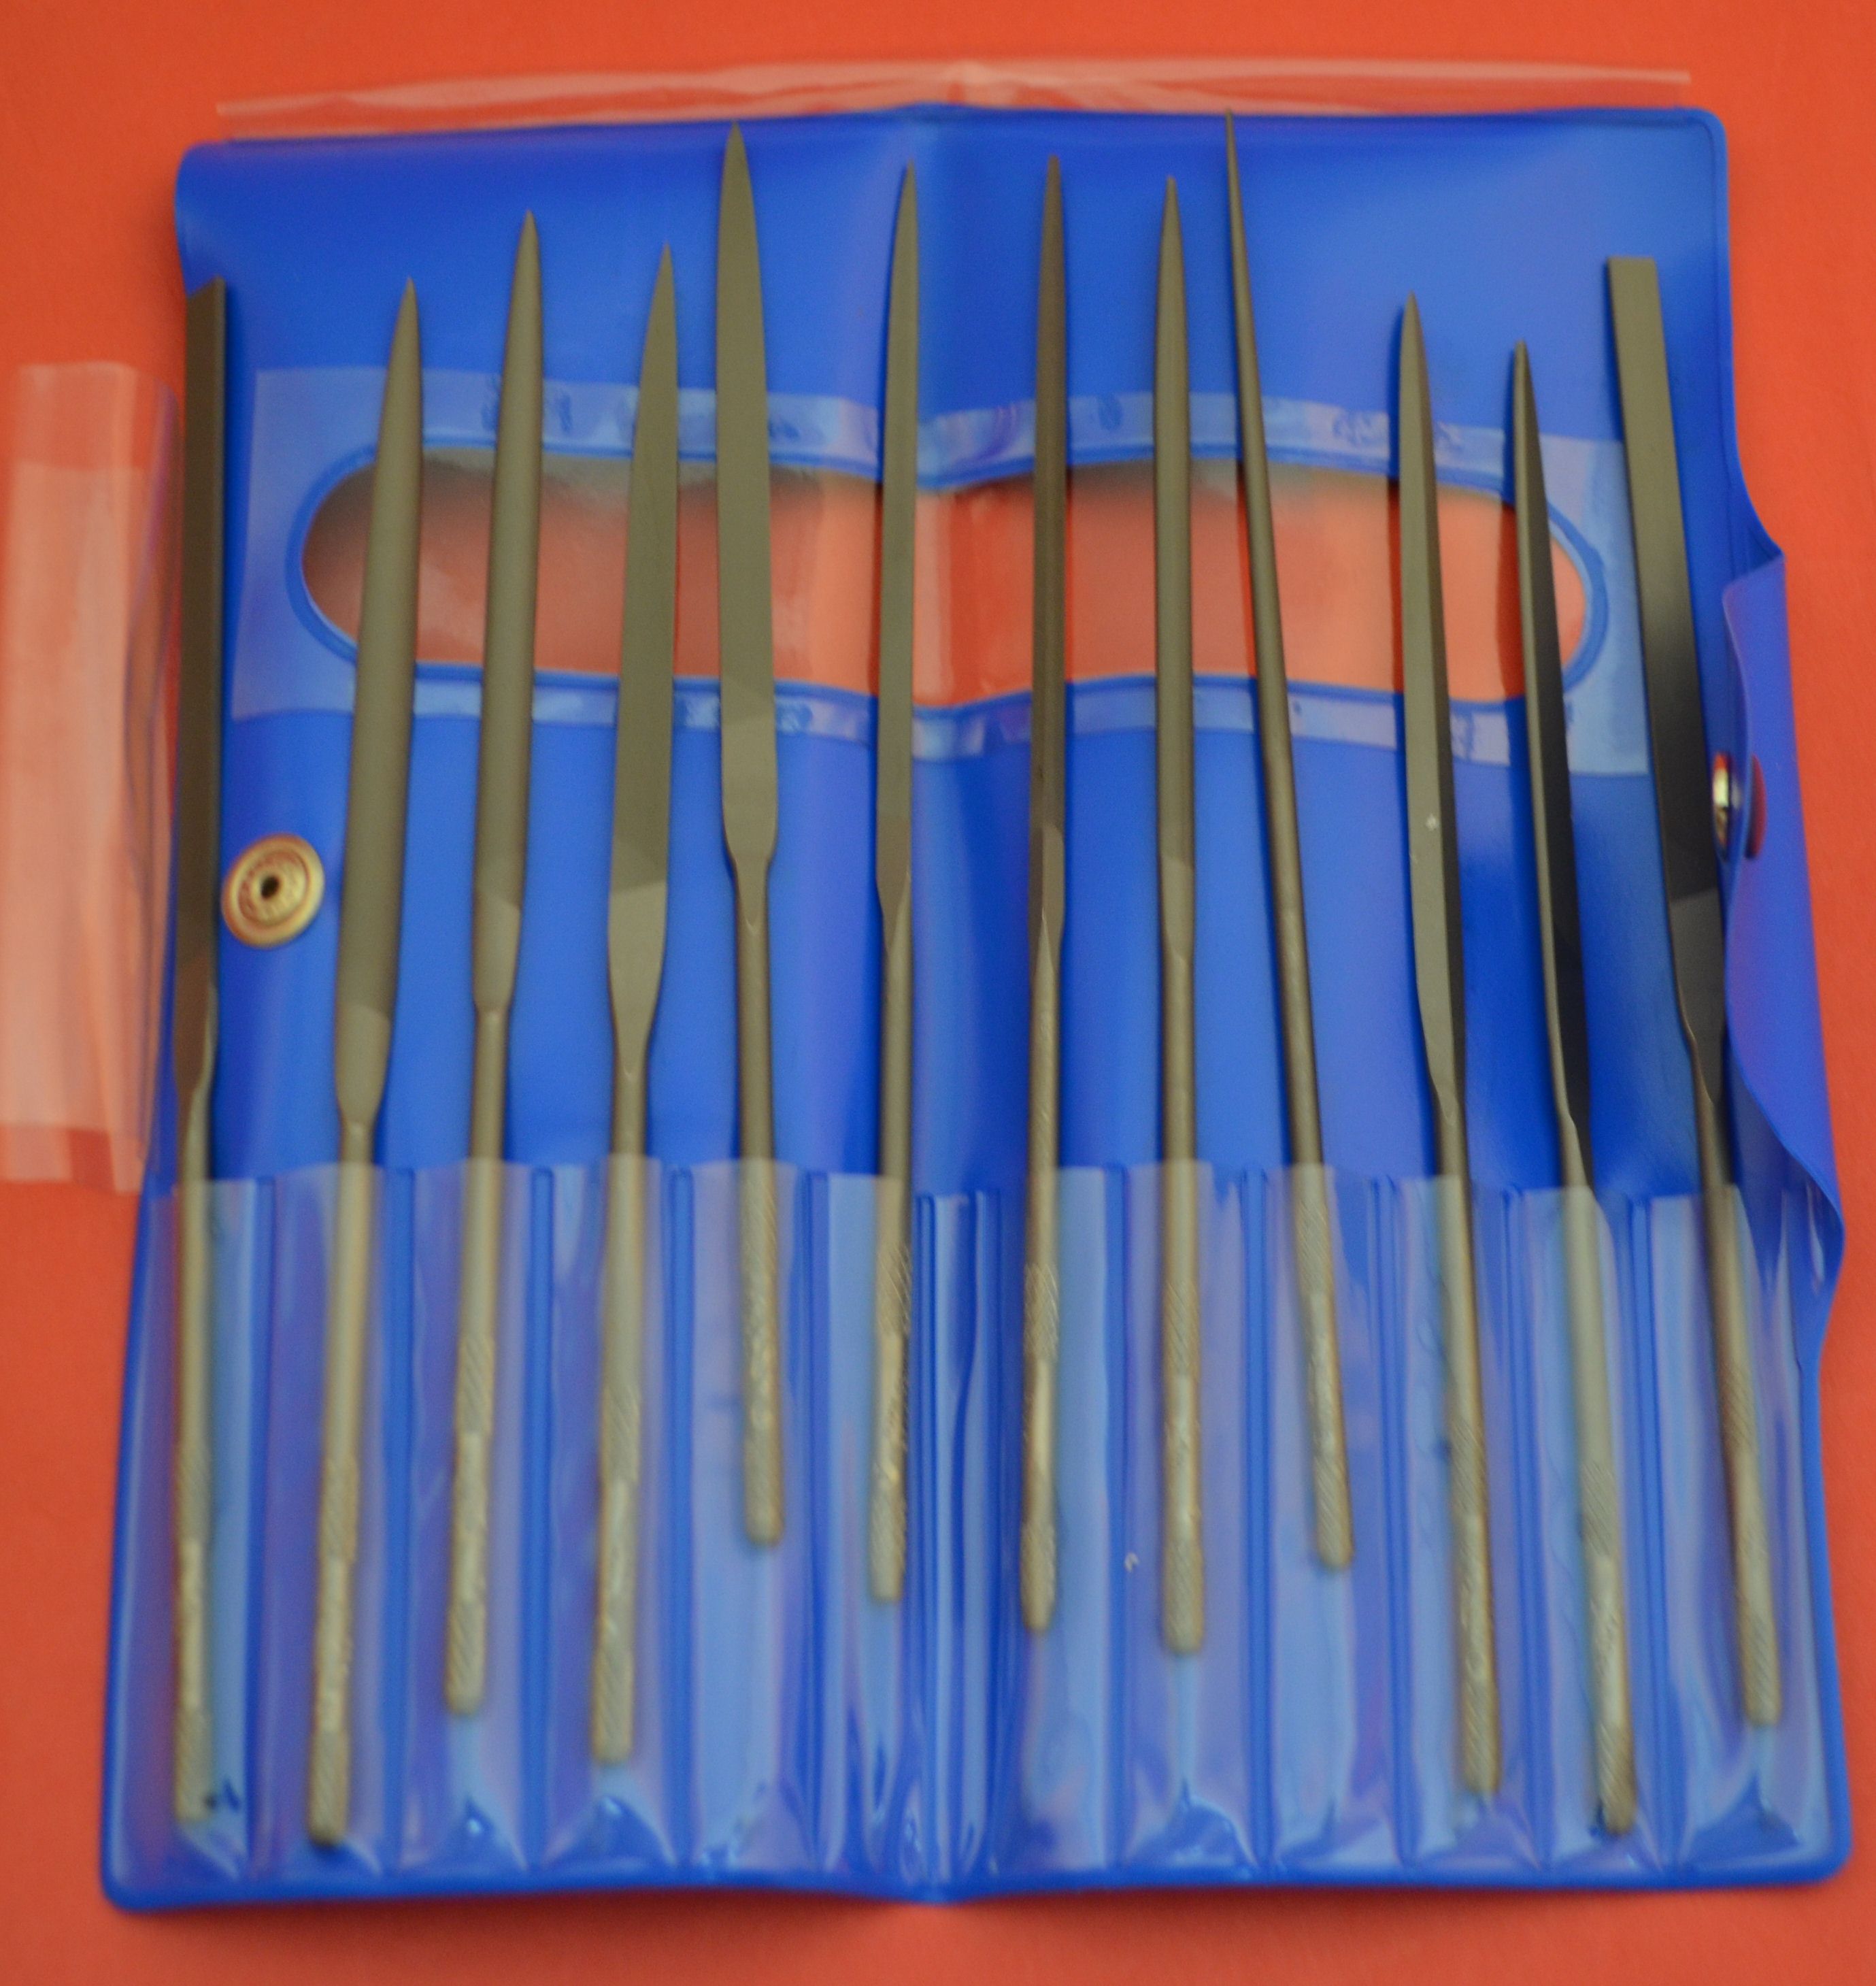 SET OF 12 VALLORBE FILES IN POUCH